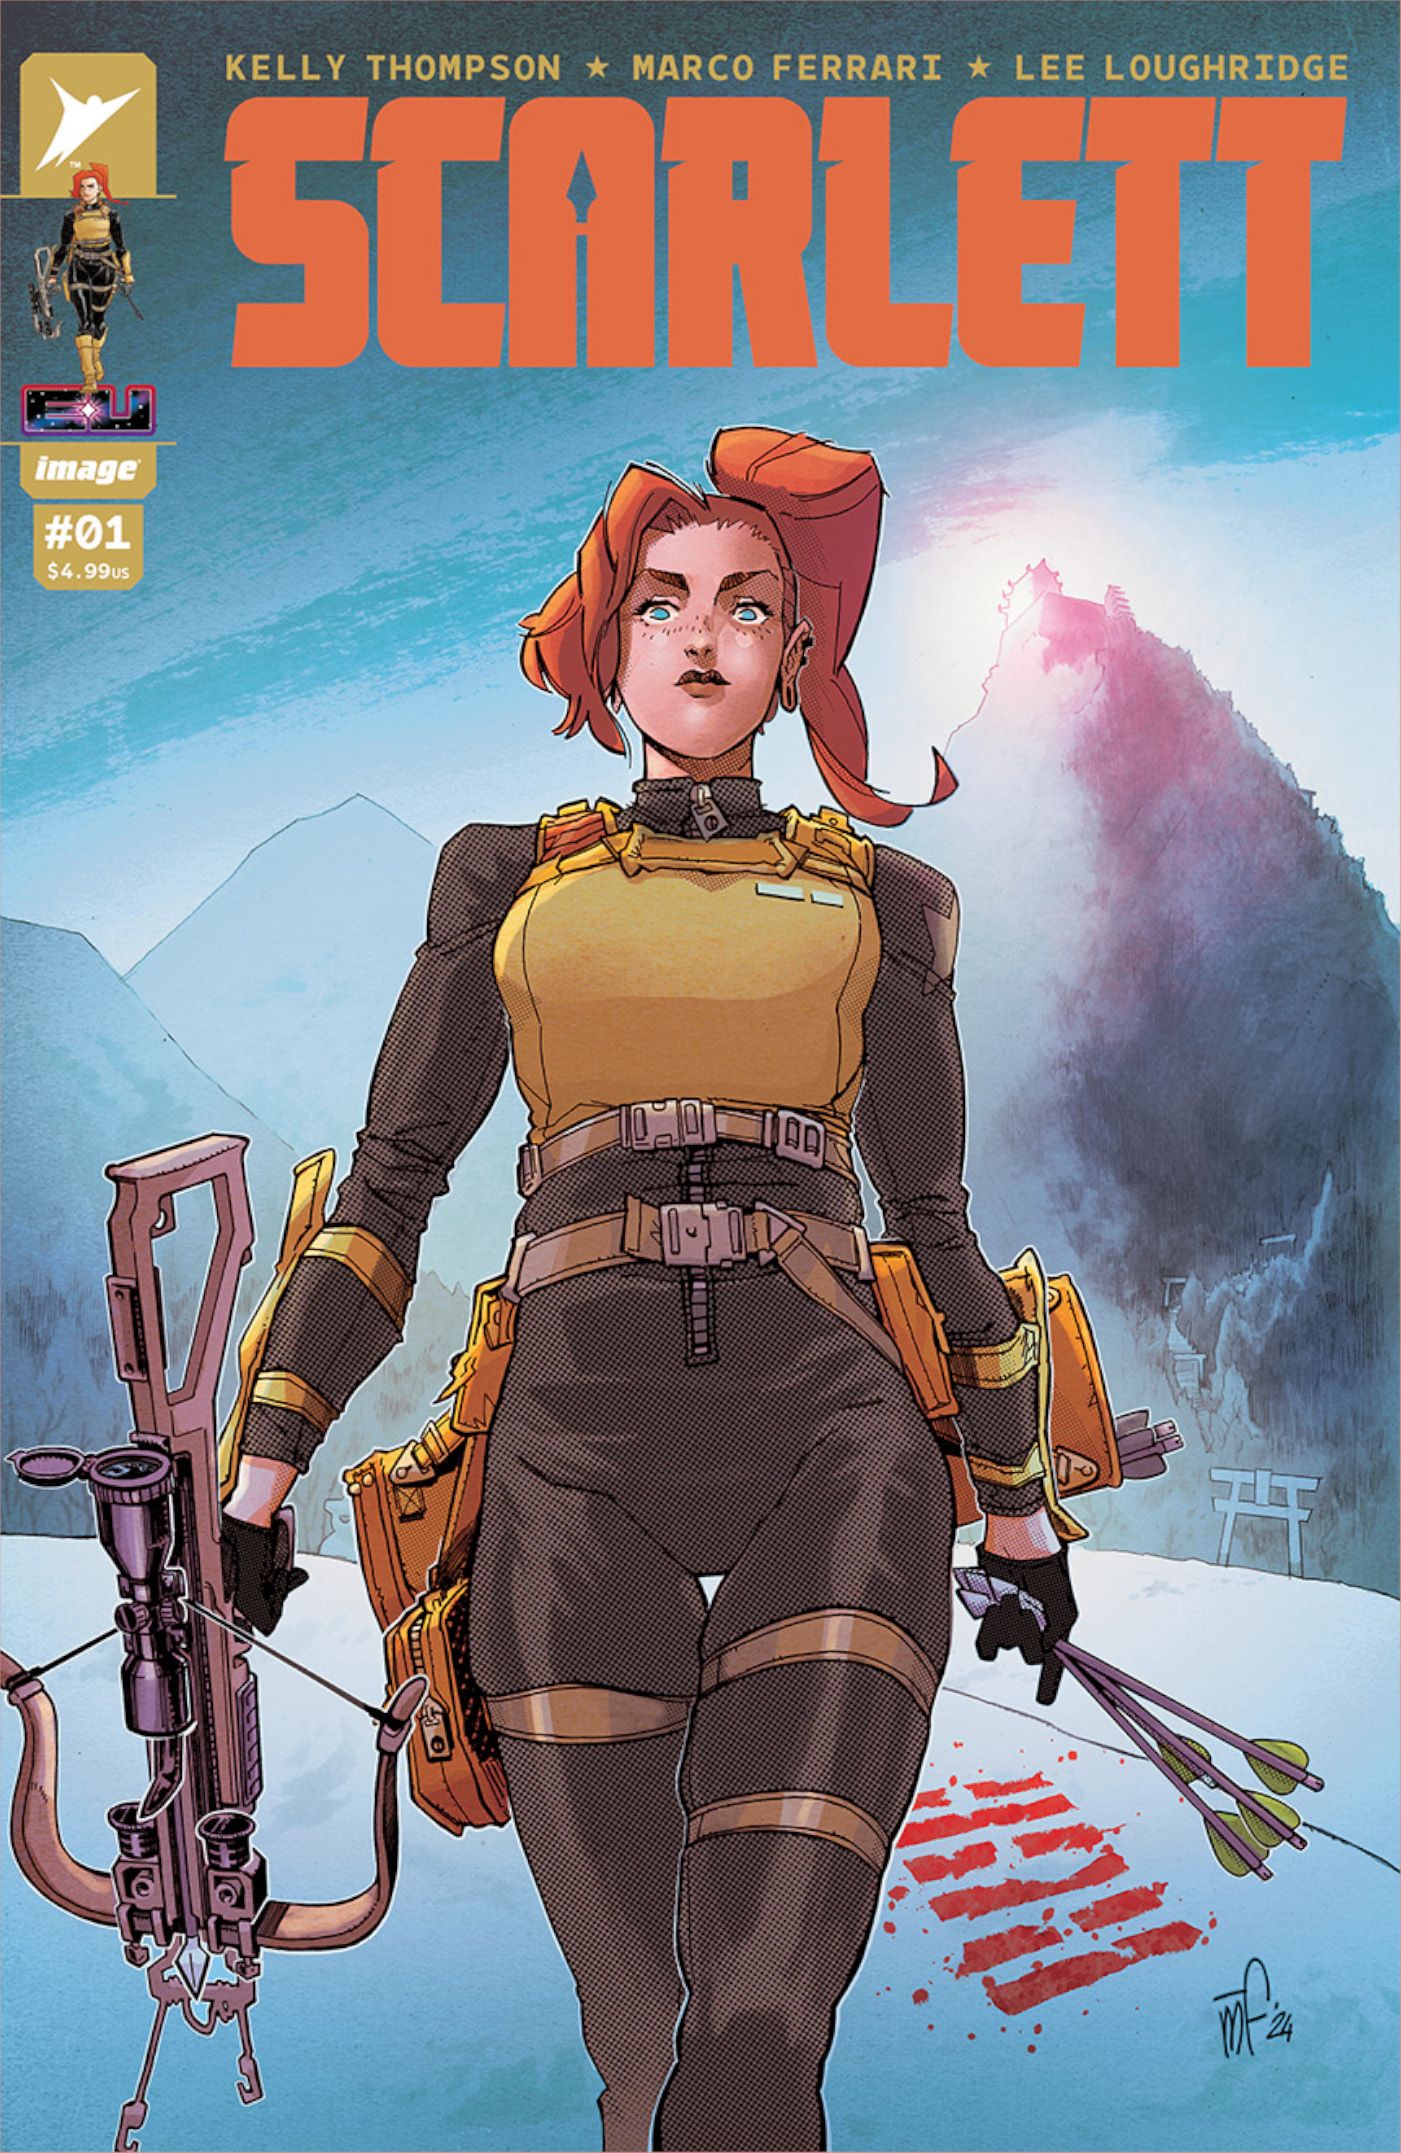 Scarlett #1 cover, Scarlett striding confidently forward, wielding a crossbow and a handful of arrows.